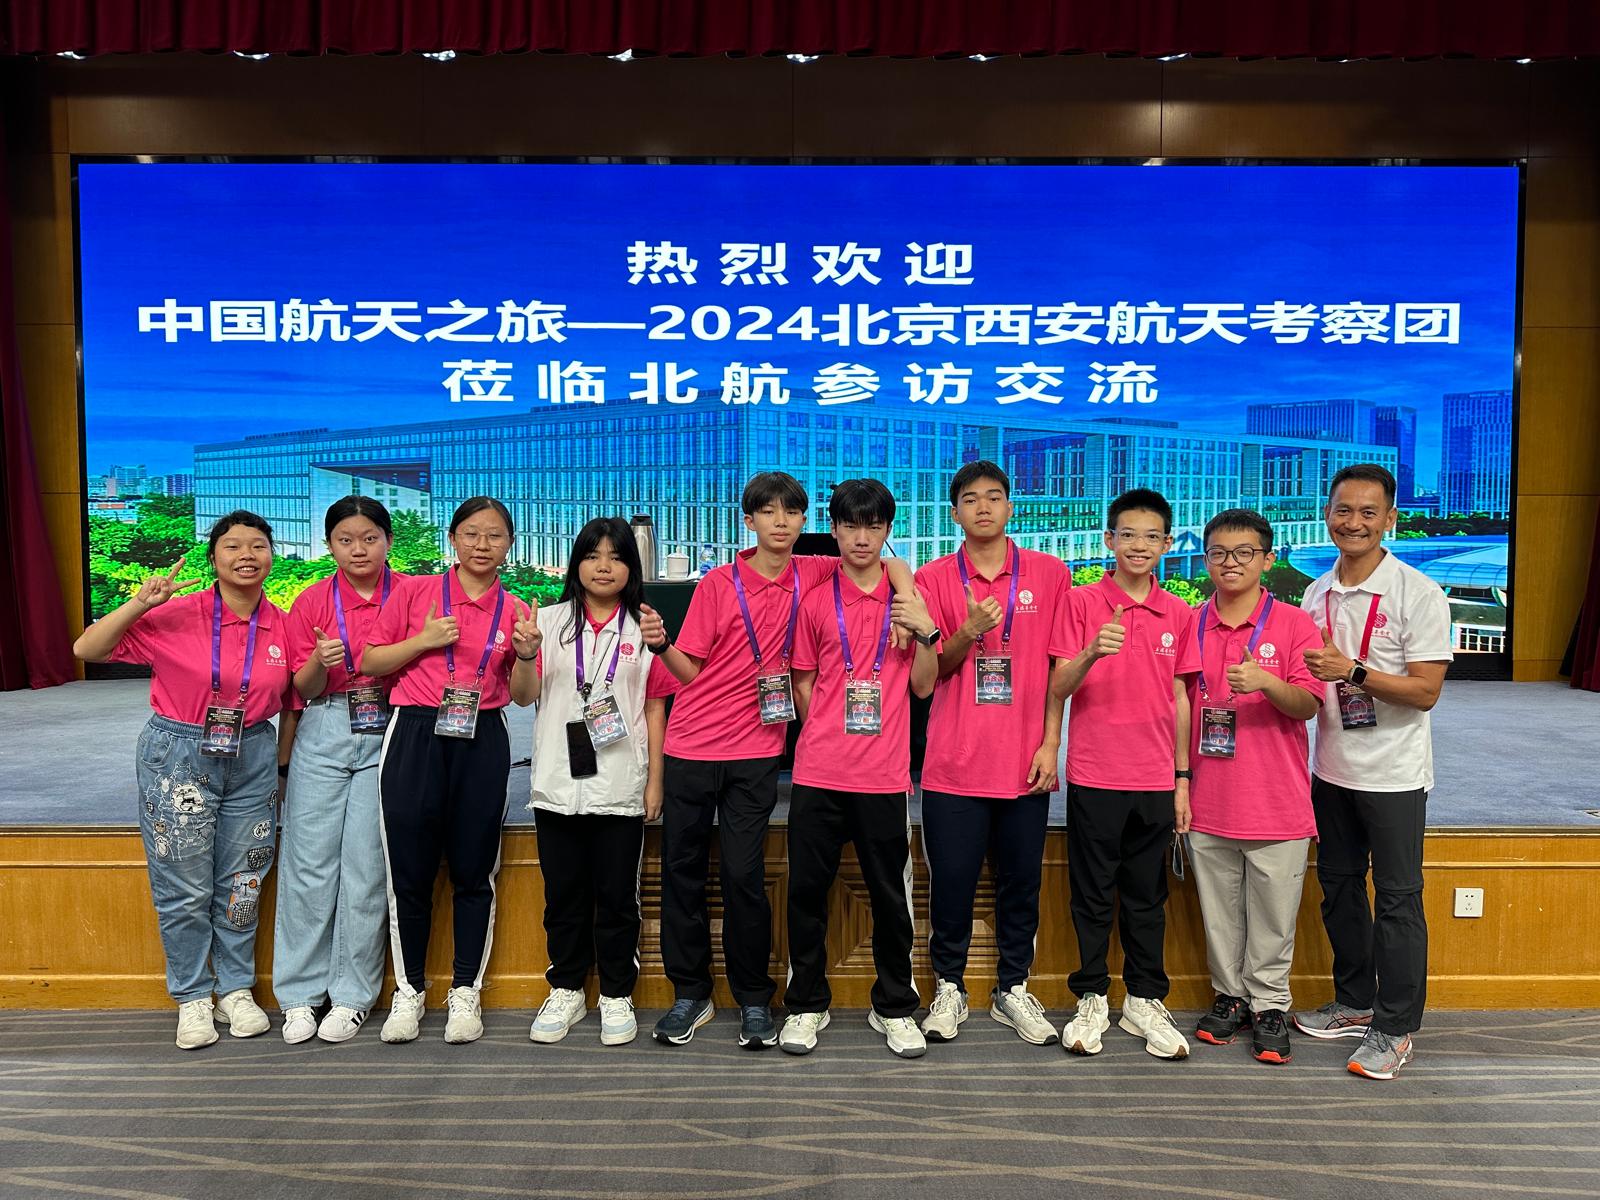 Participated in the 7th China Aerospace Journey organized by the Hong Kong Shine Tak Foundation